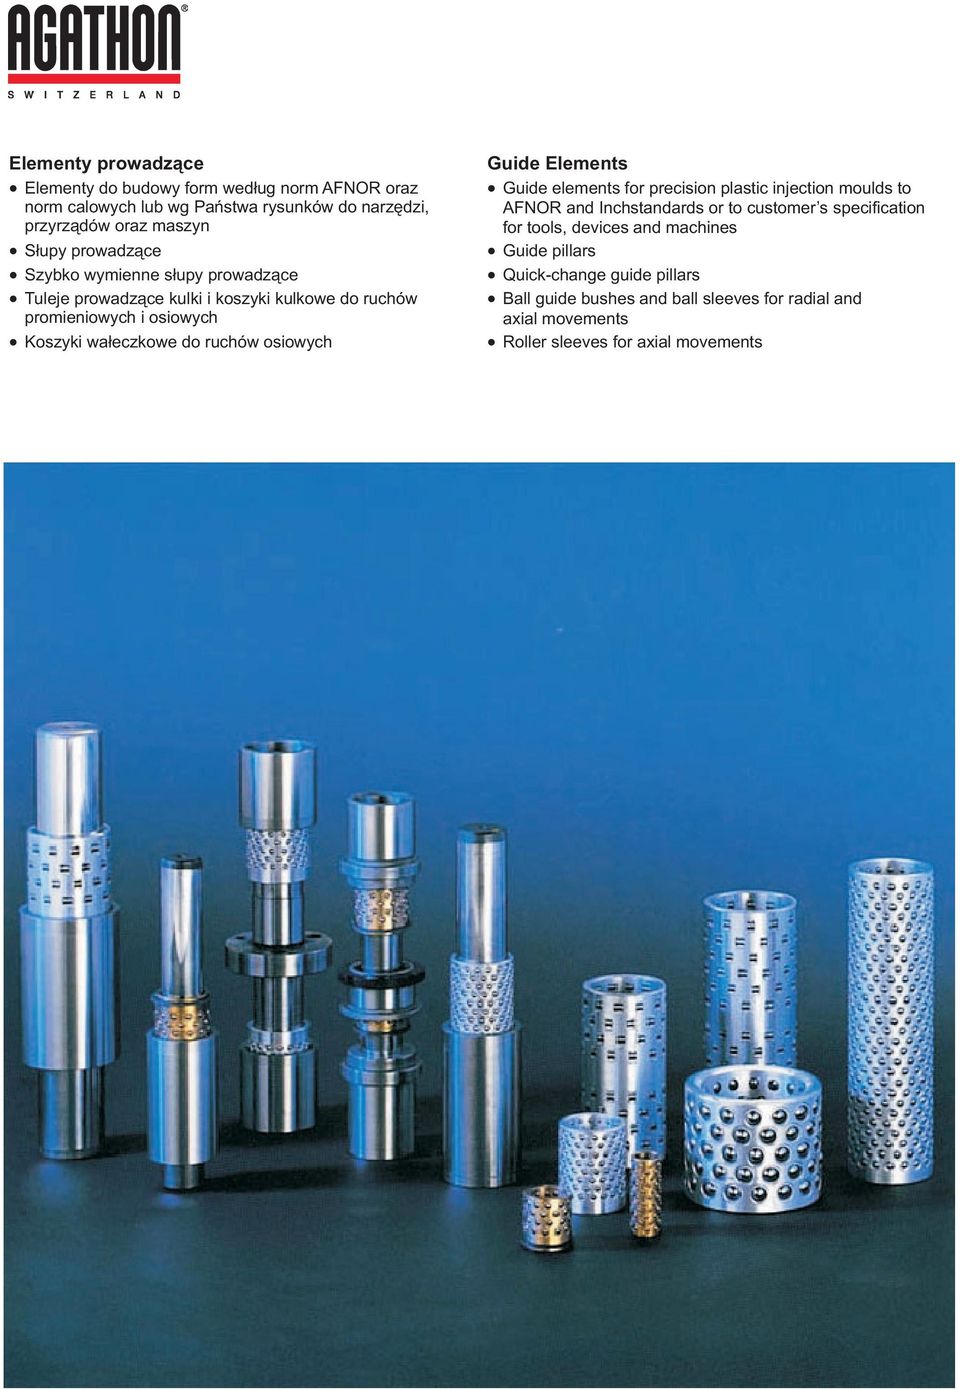 osiowych Guide Elements Guide elements for precision plastic injection moulds to AFNOR and Inchstandards or to customer s specification for tools,